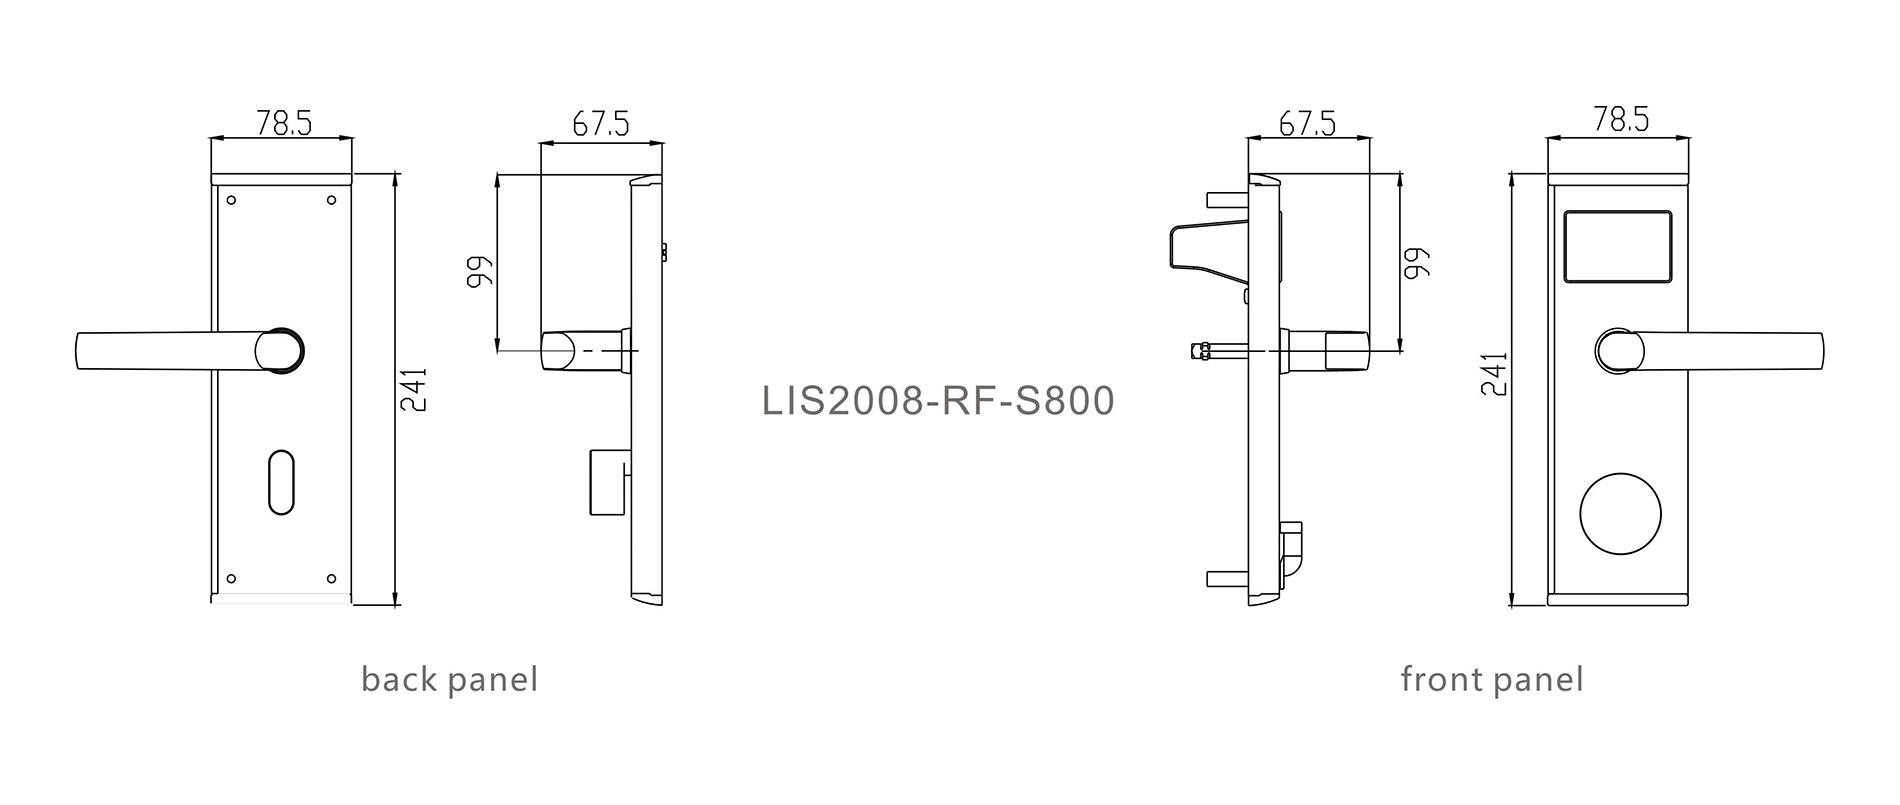 Level rf290 electronic door locks hotel supplier for lodging house